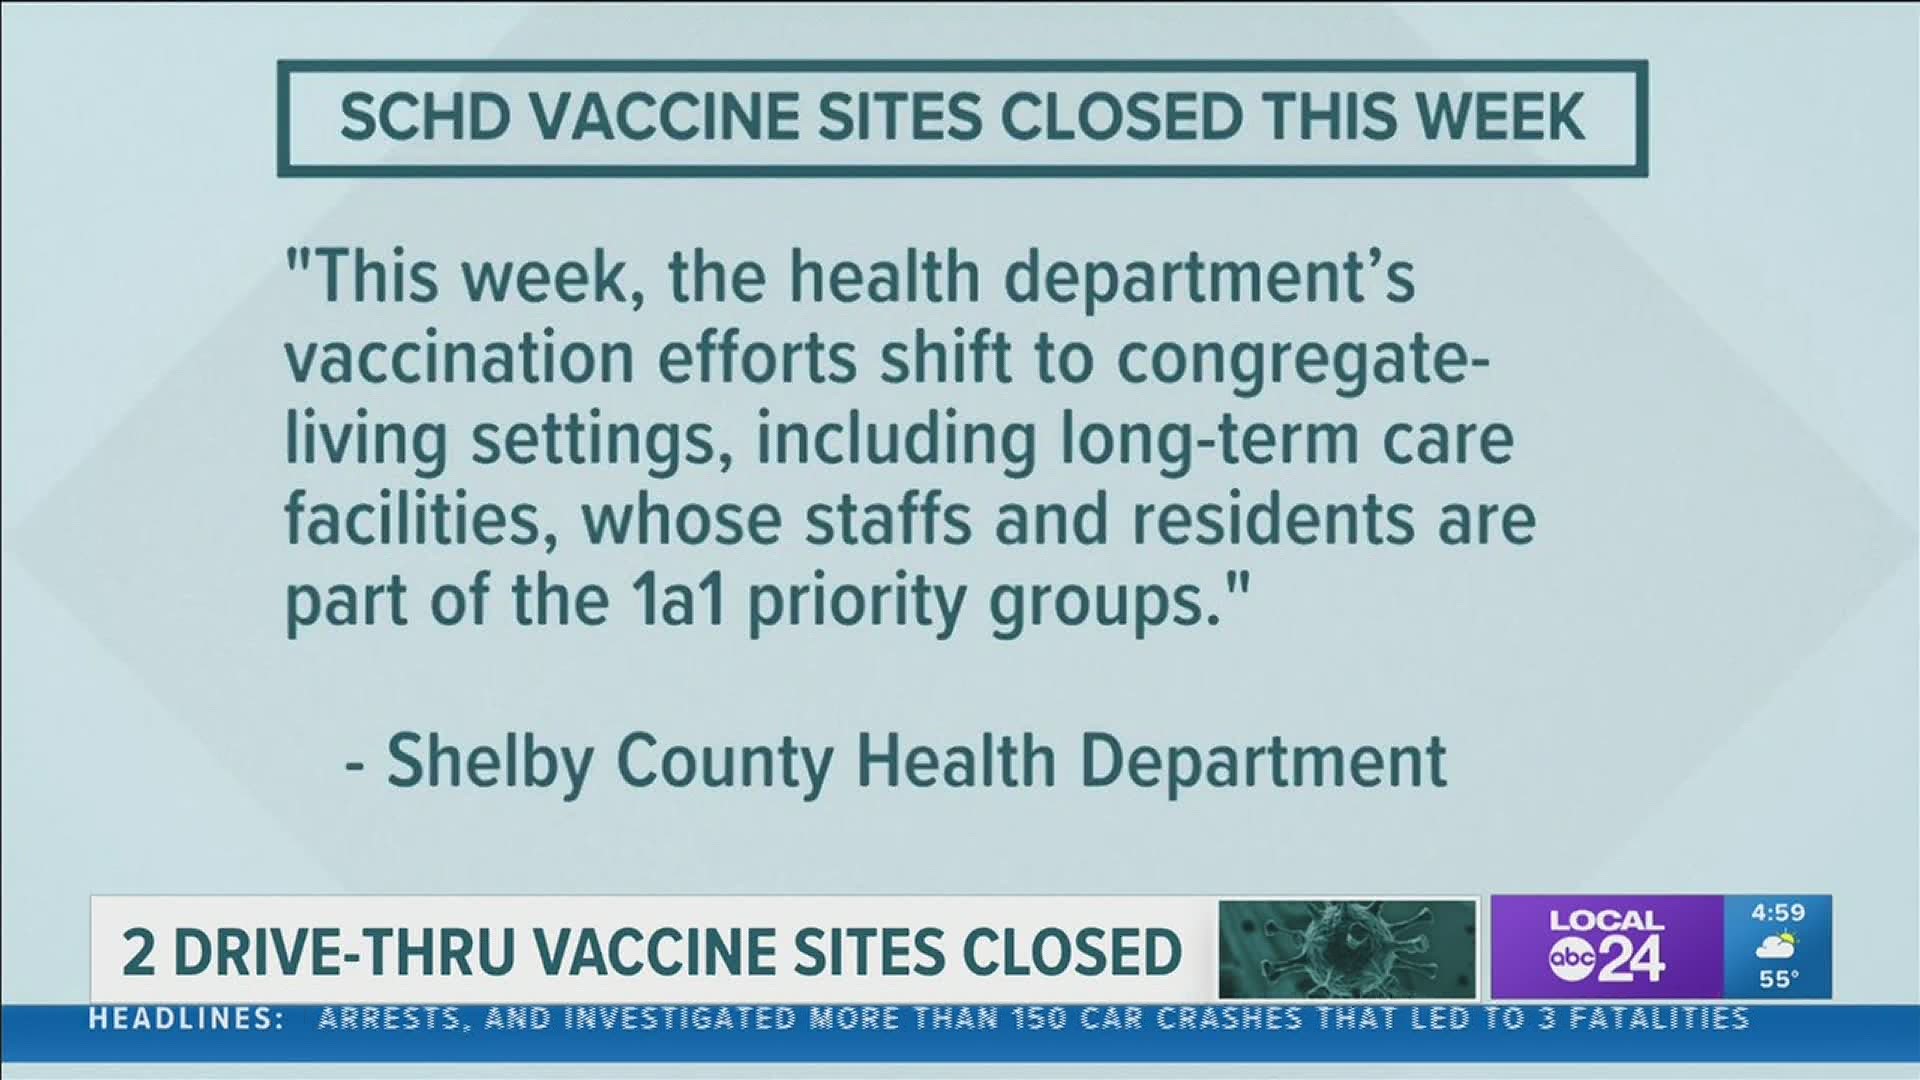 The Shelby County Health Department will focus on those in long-term care as frontline hospital workers prepare for second vaccine dose this week.